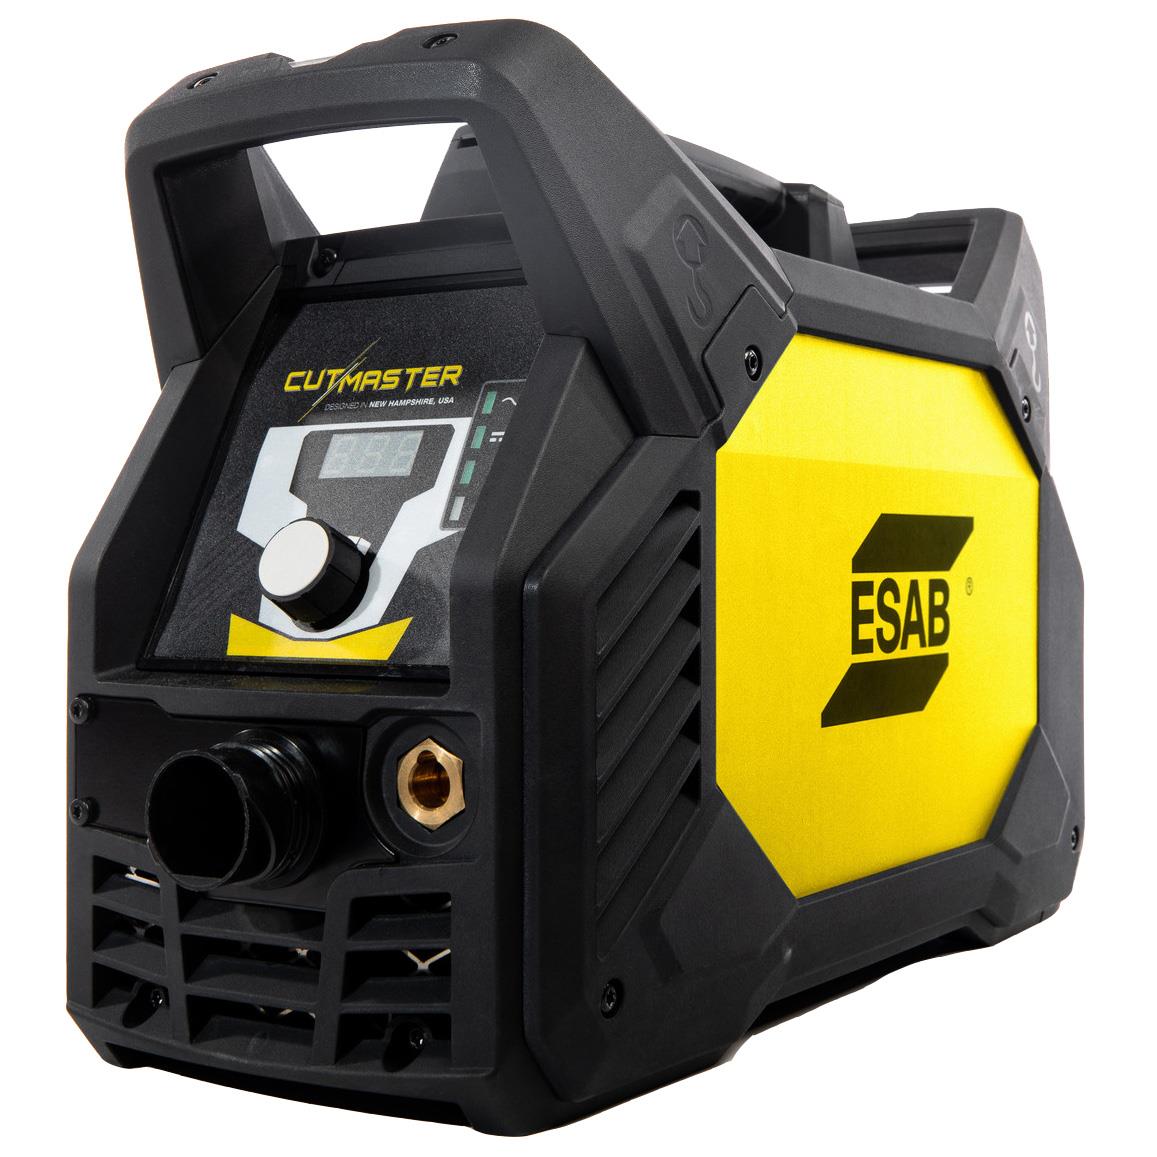 0559140004  ESAB Cutmaster 40 Plasma Cutter with 5m SL60 Torch & Earth Cable, 16mm Cut. Dual Voltage 110v & 240v CE